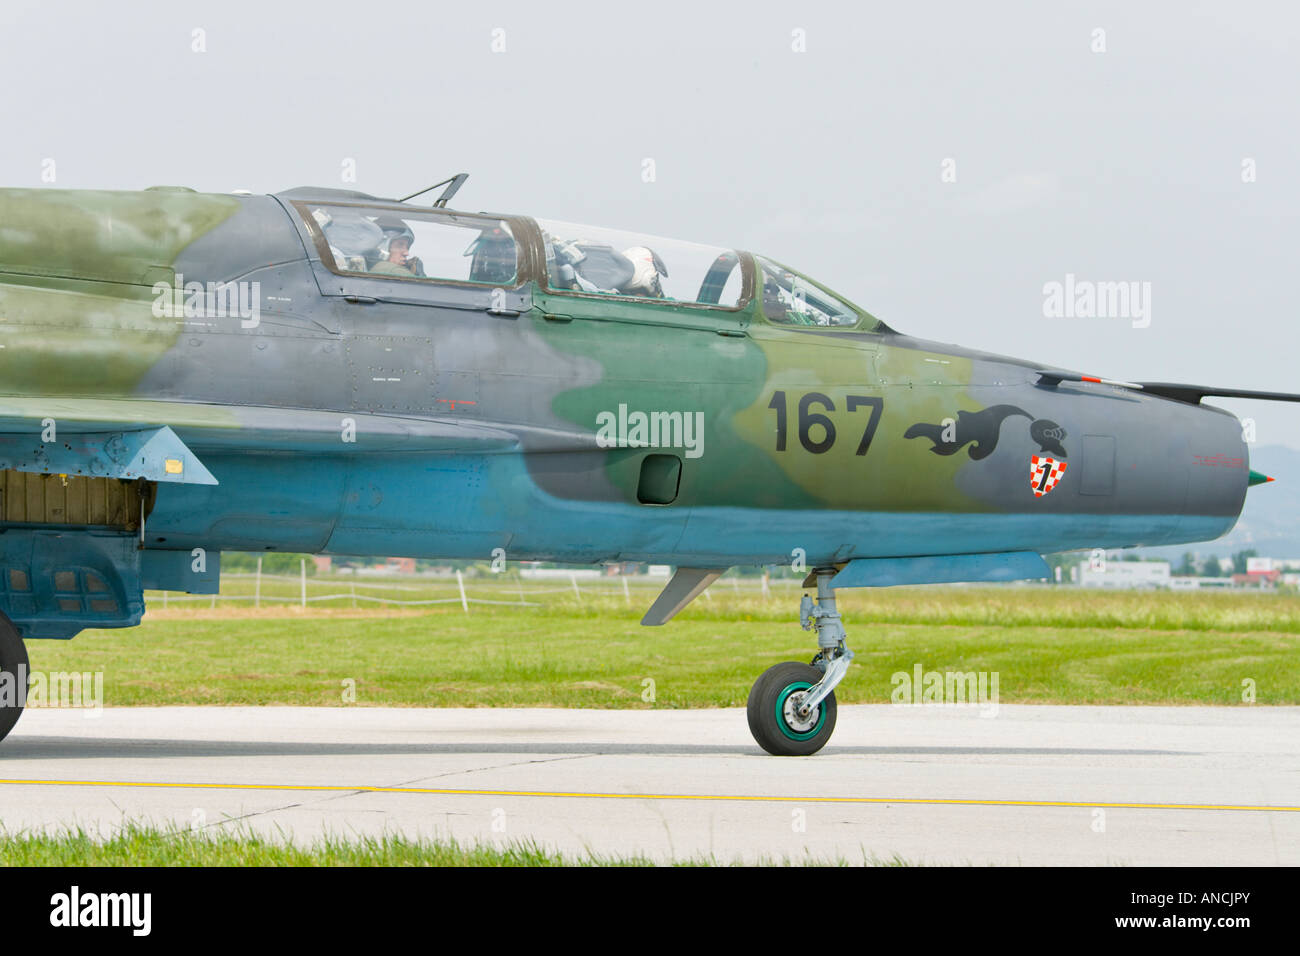 Croatian Air Force MiG-21 UMD two seater trainer '167', Pleso AFB during 'open day' visit in 2007 Stock Photo